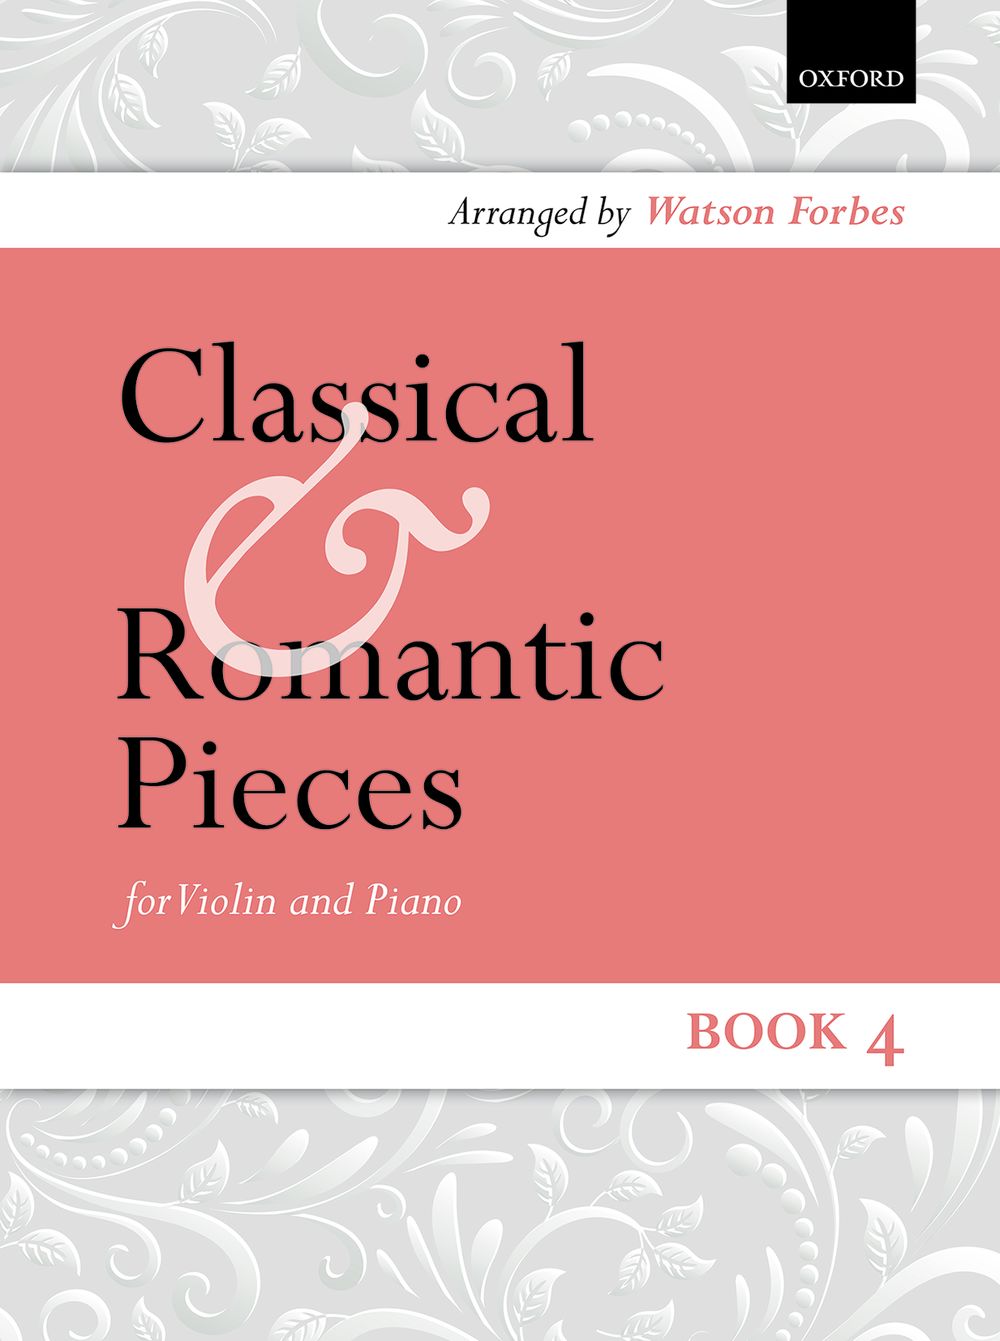 Classical & Romantic Pieces Book 4 Forbes Violin Sheet Music Songbook